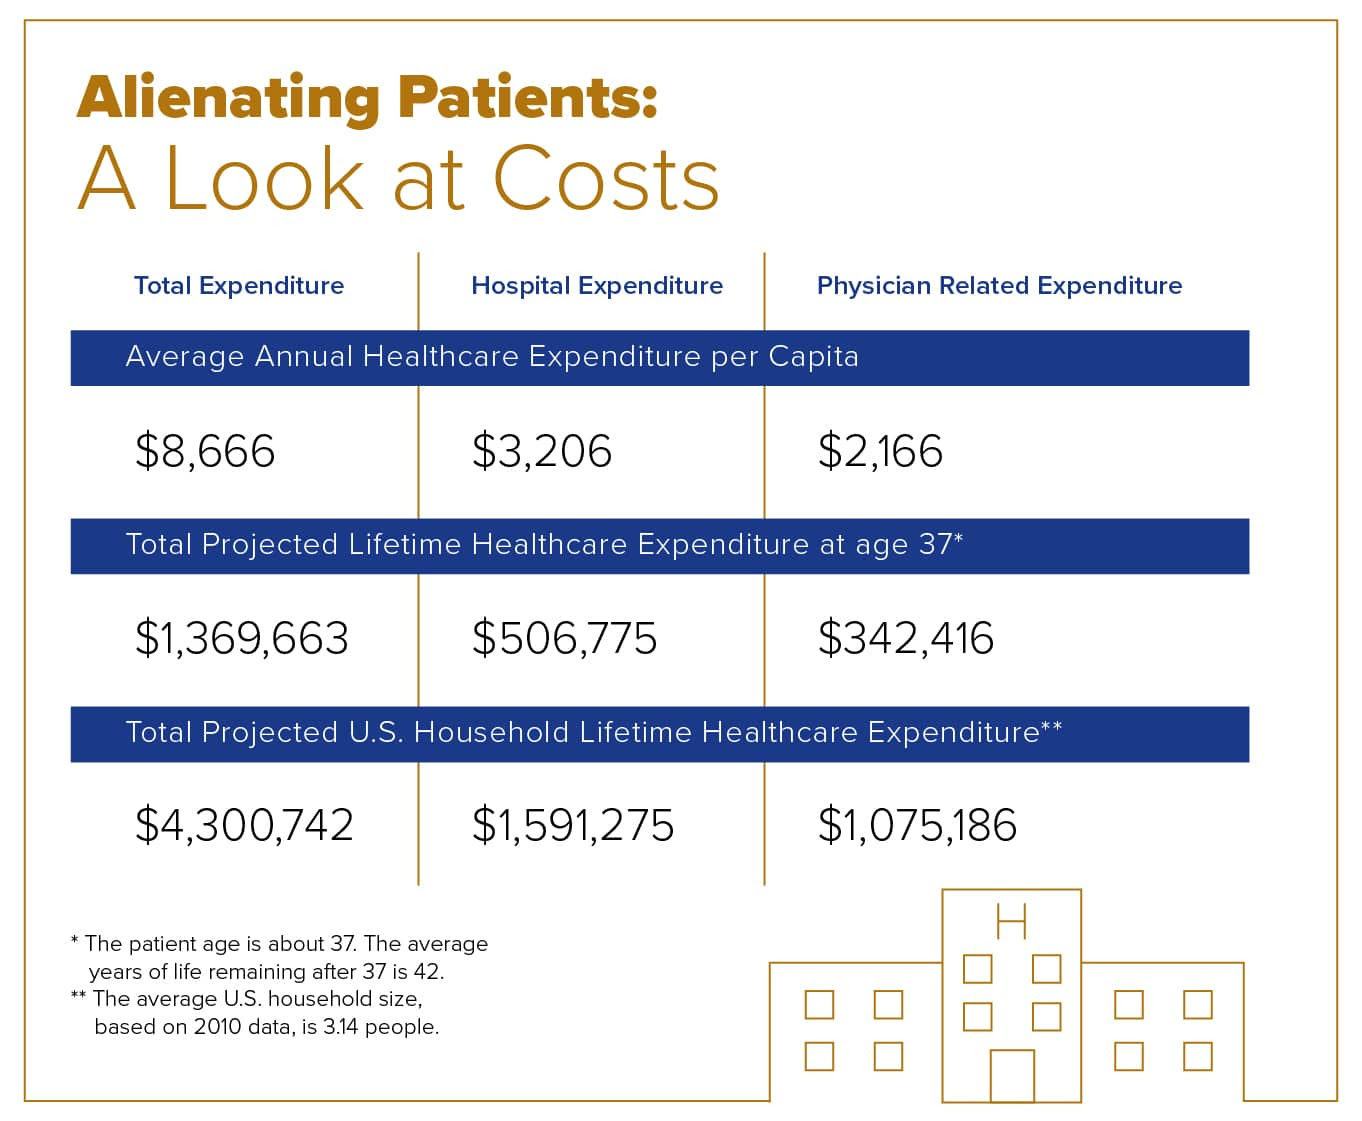 A breakdown of the cost of alienating patients.